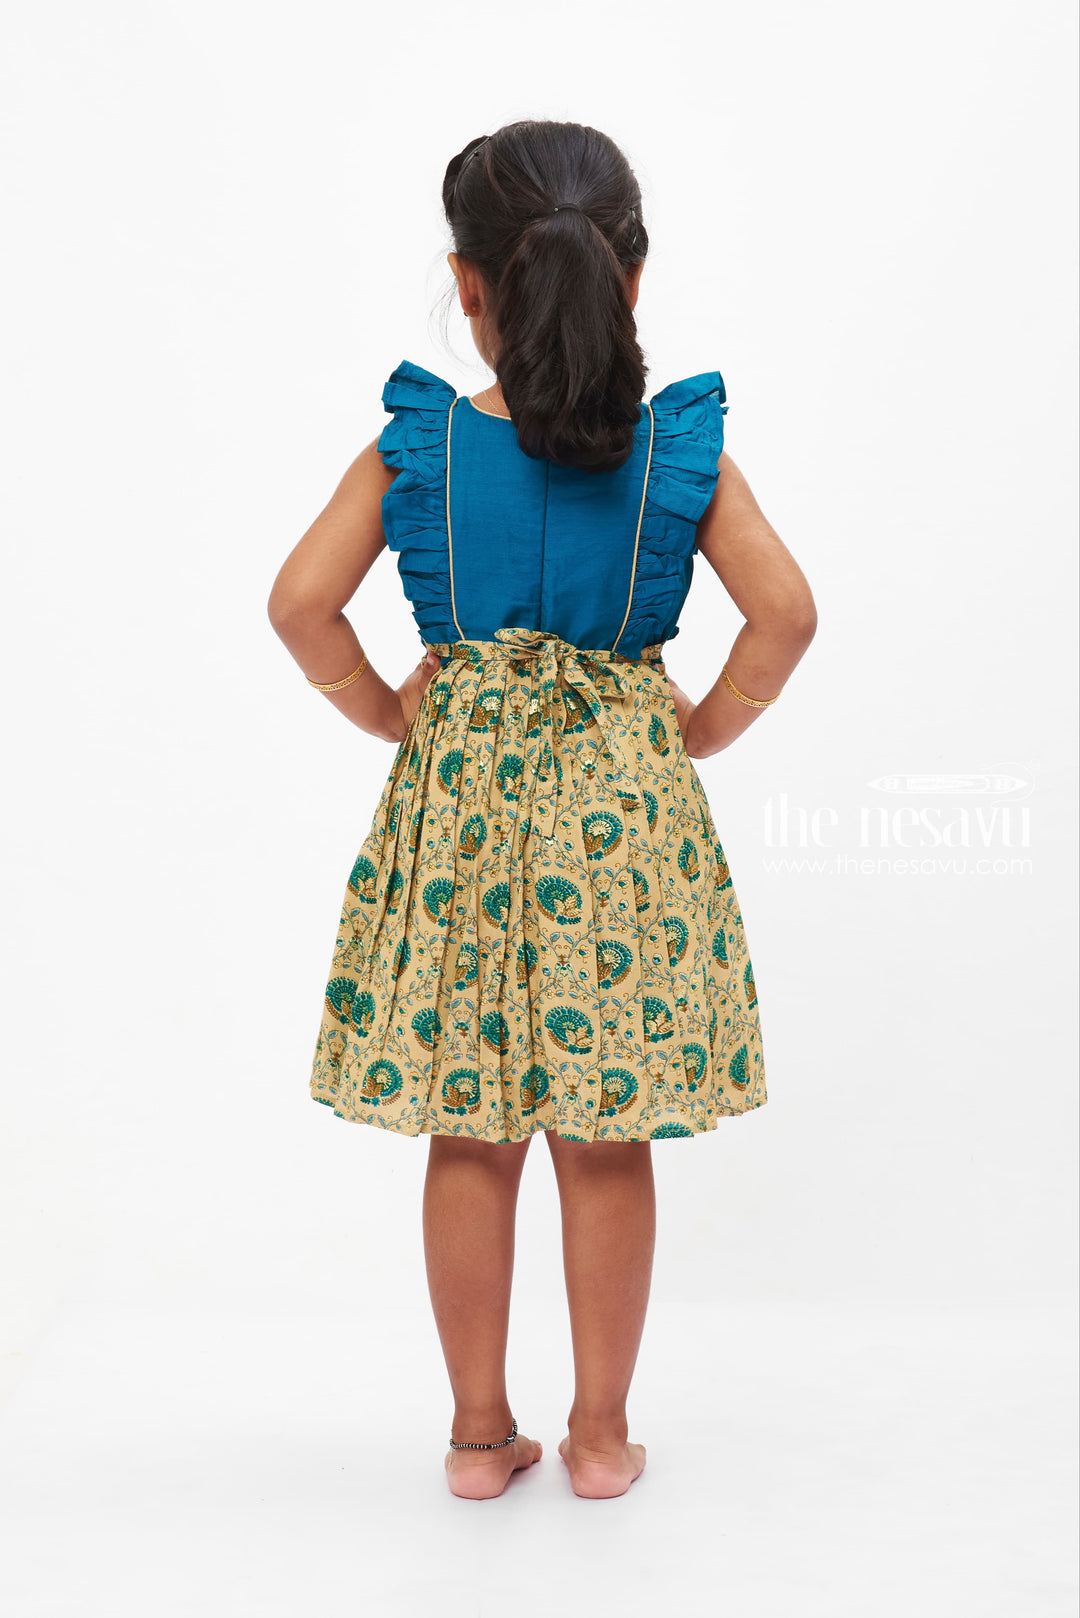 The Nesavu Baby Cotton Frocks Teal Blue and Beige Traditional Peacock Printed Baby Frock for Girls Nesavu Girls Teal Peacock Print Festive Dress | Baby Frock for little Girls | The Nesavu